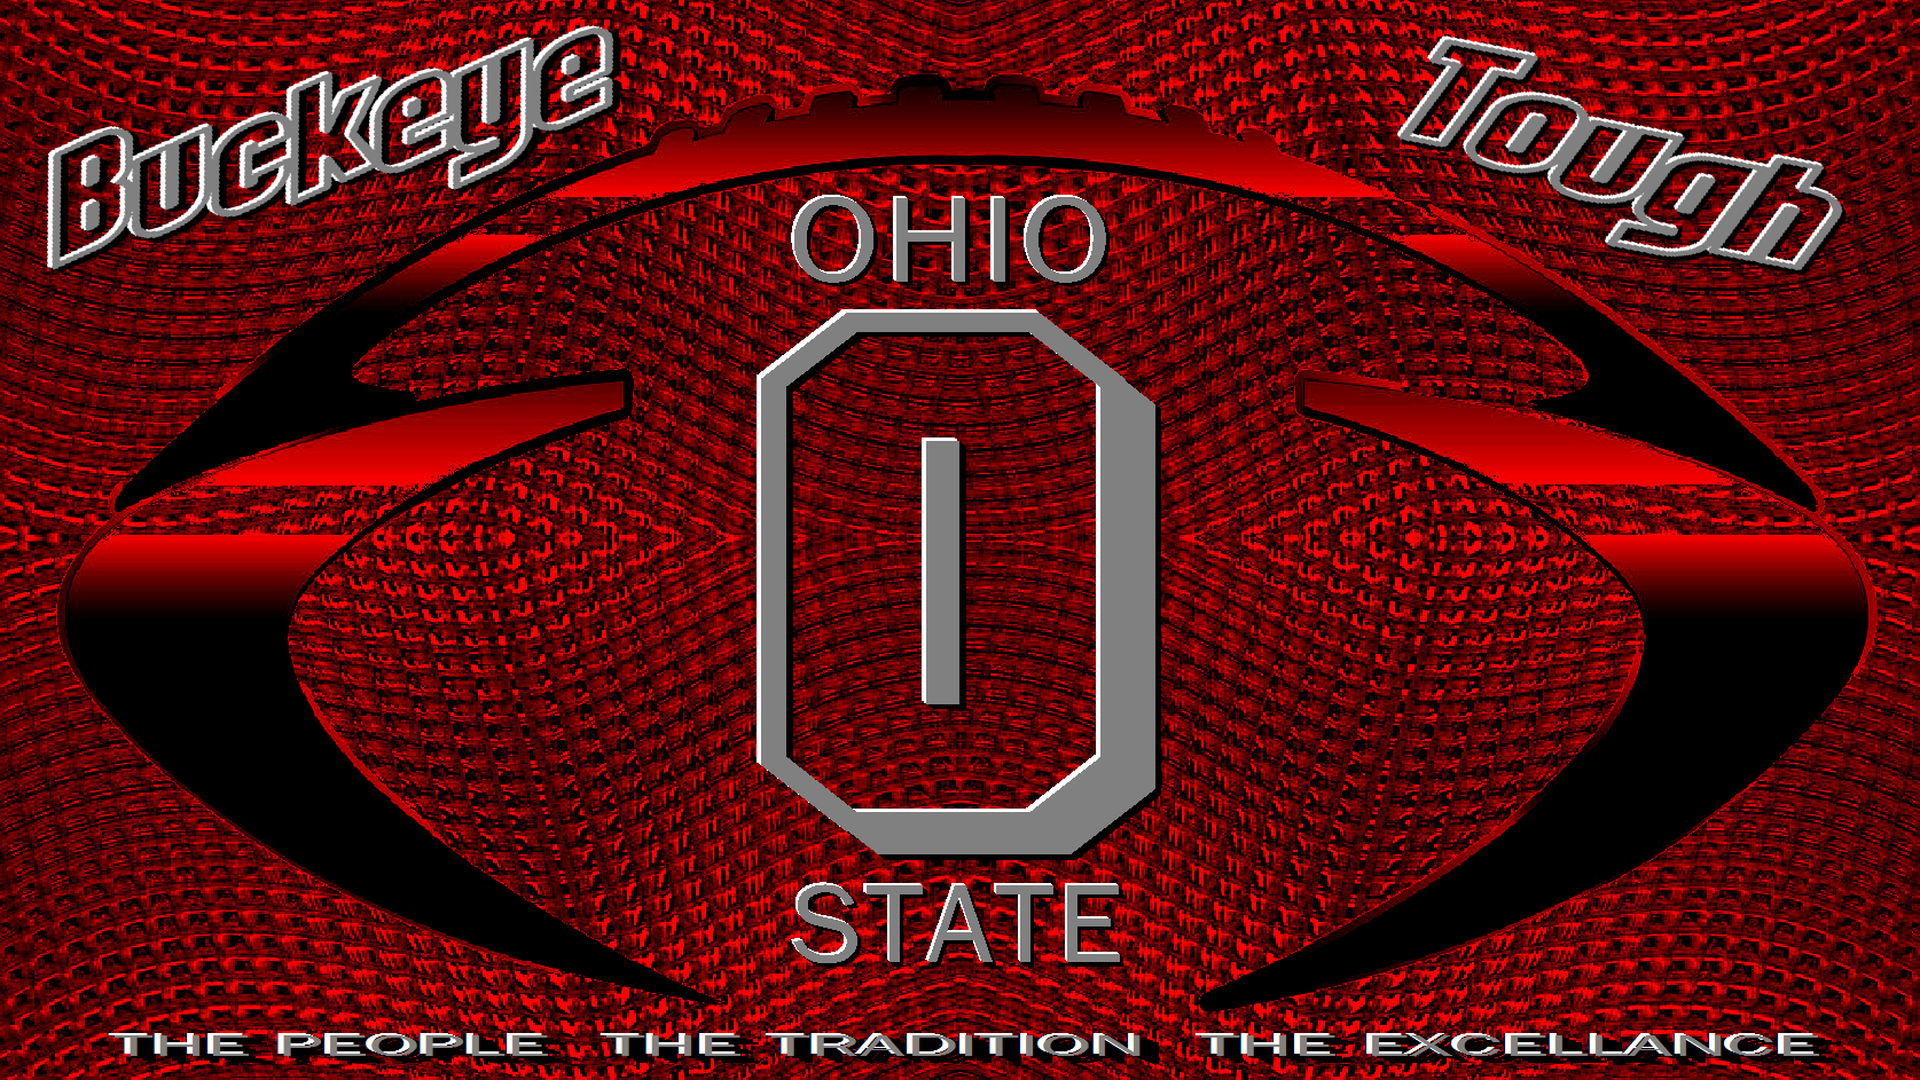 Ohio State Quotes And Sayings